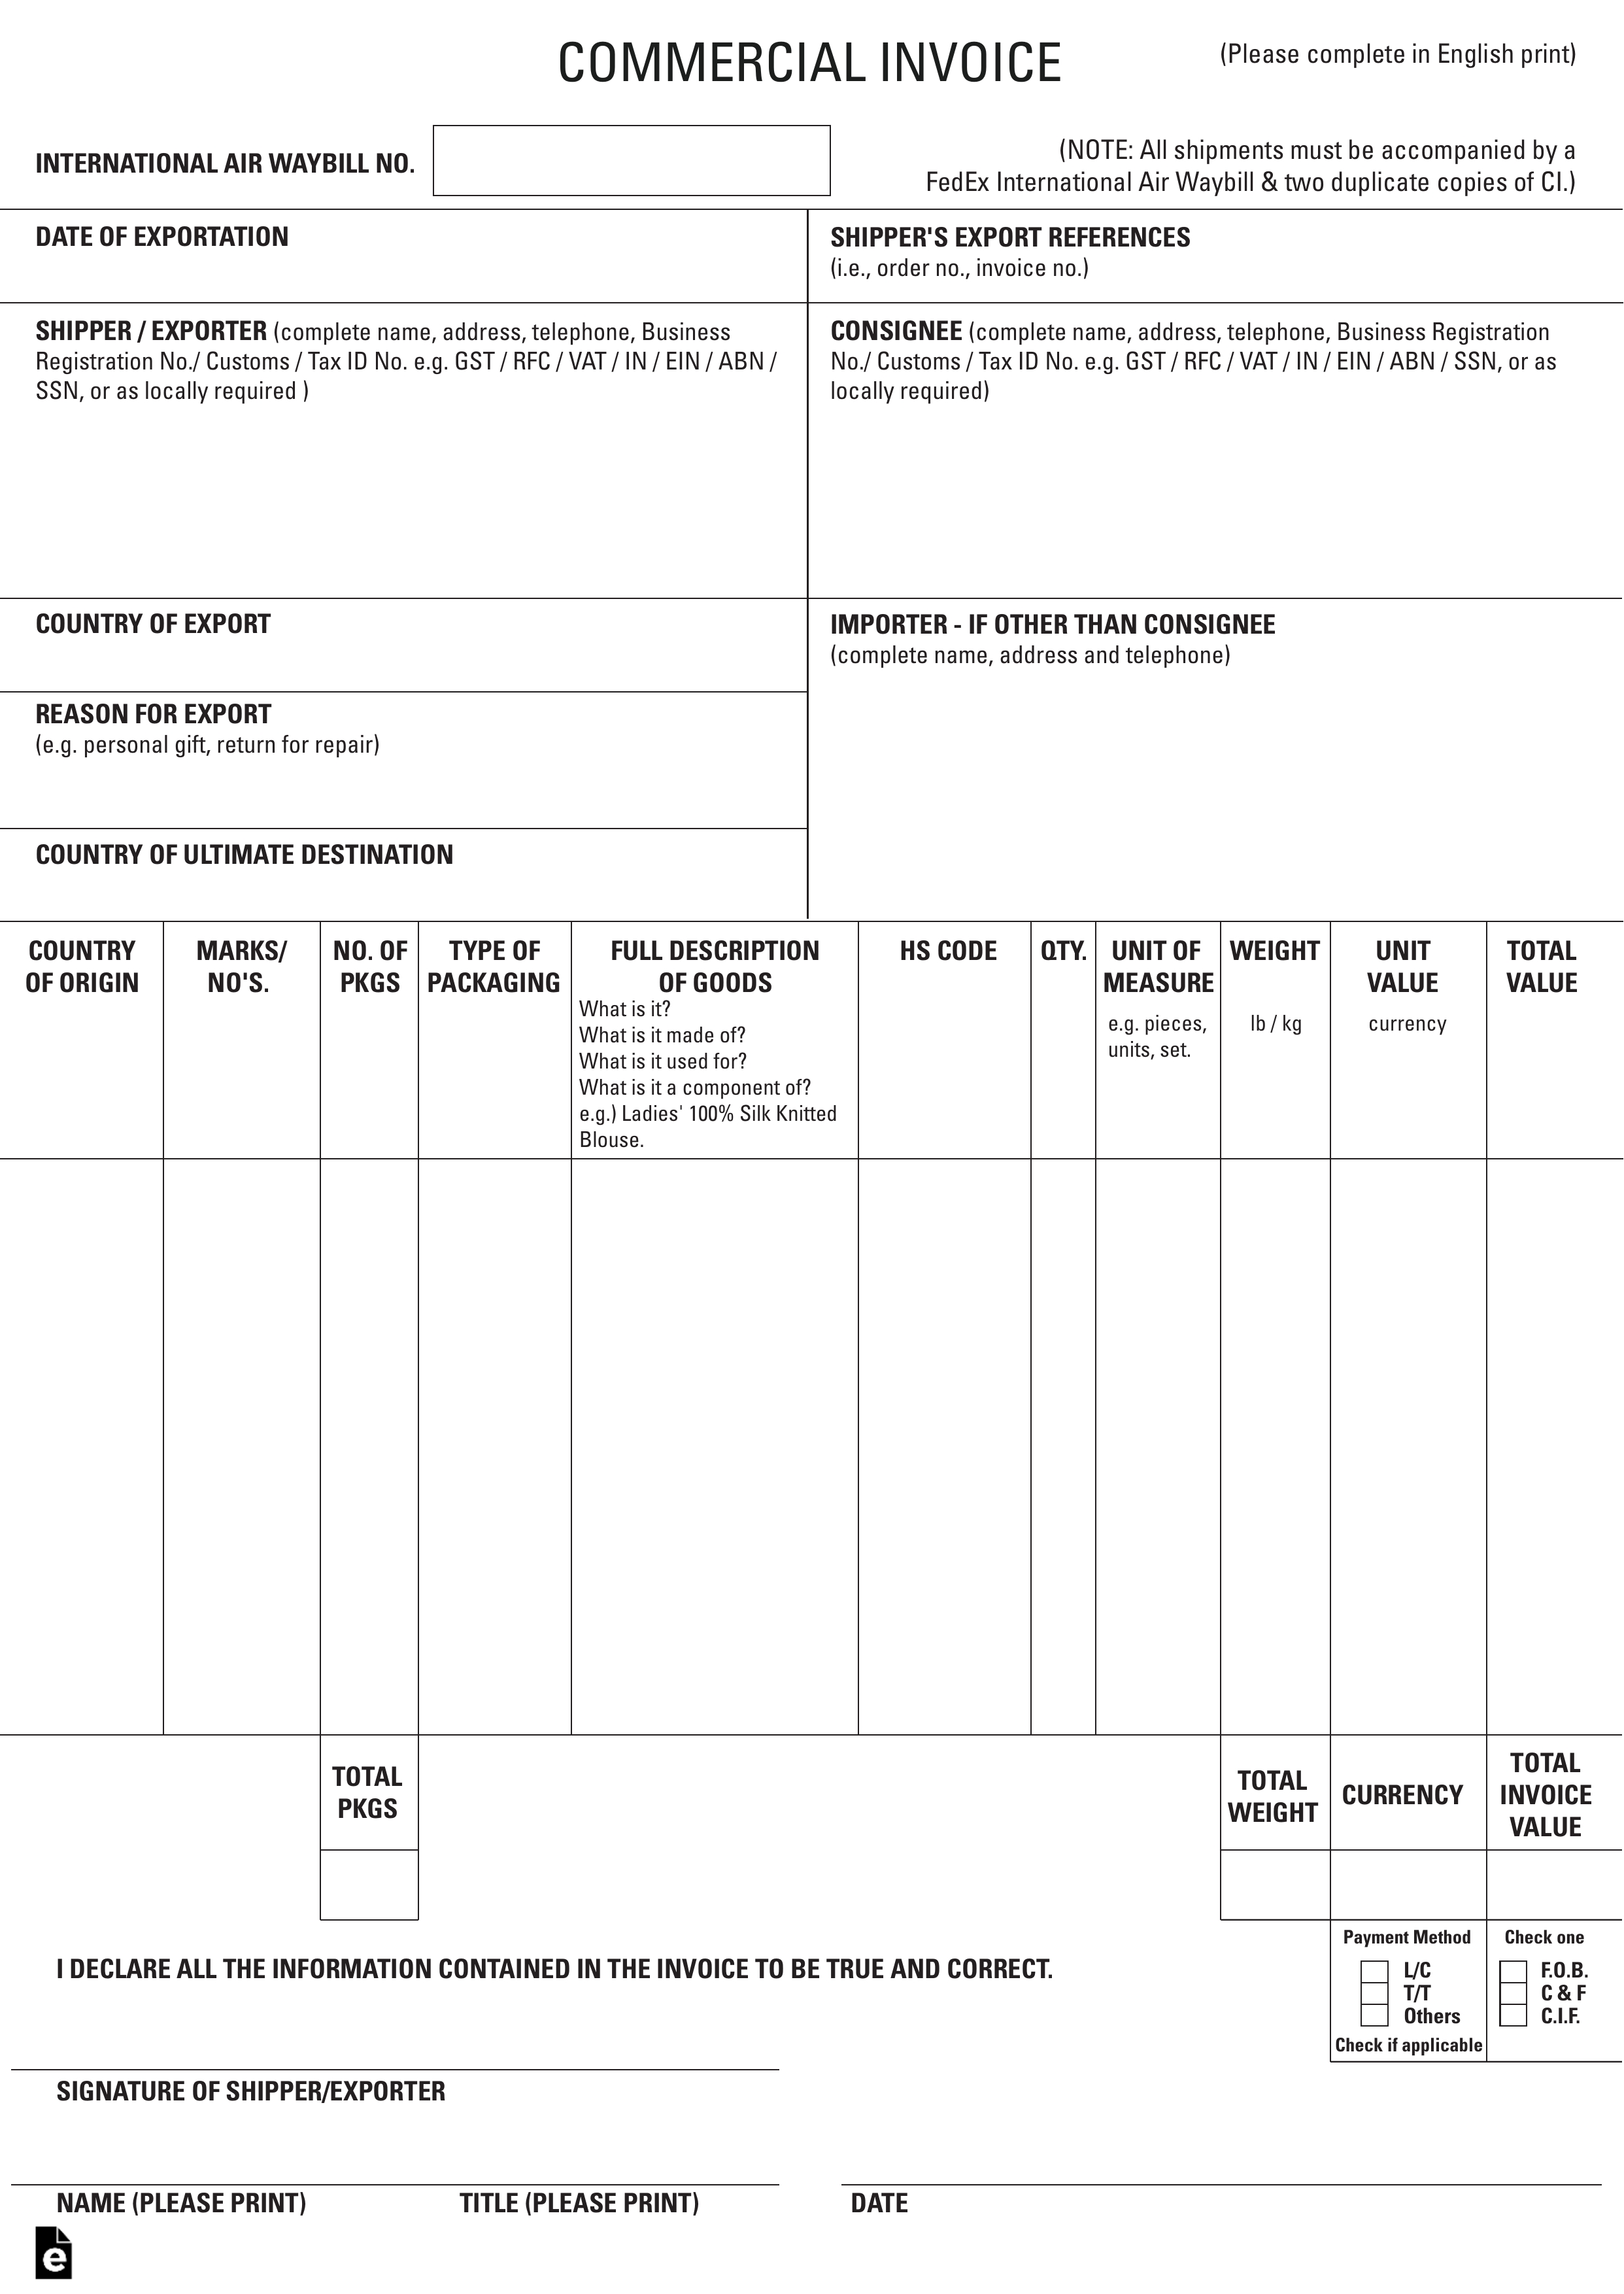 free international commercial invoice templates pdf commercial invoice fileable pdf free